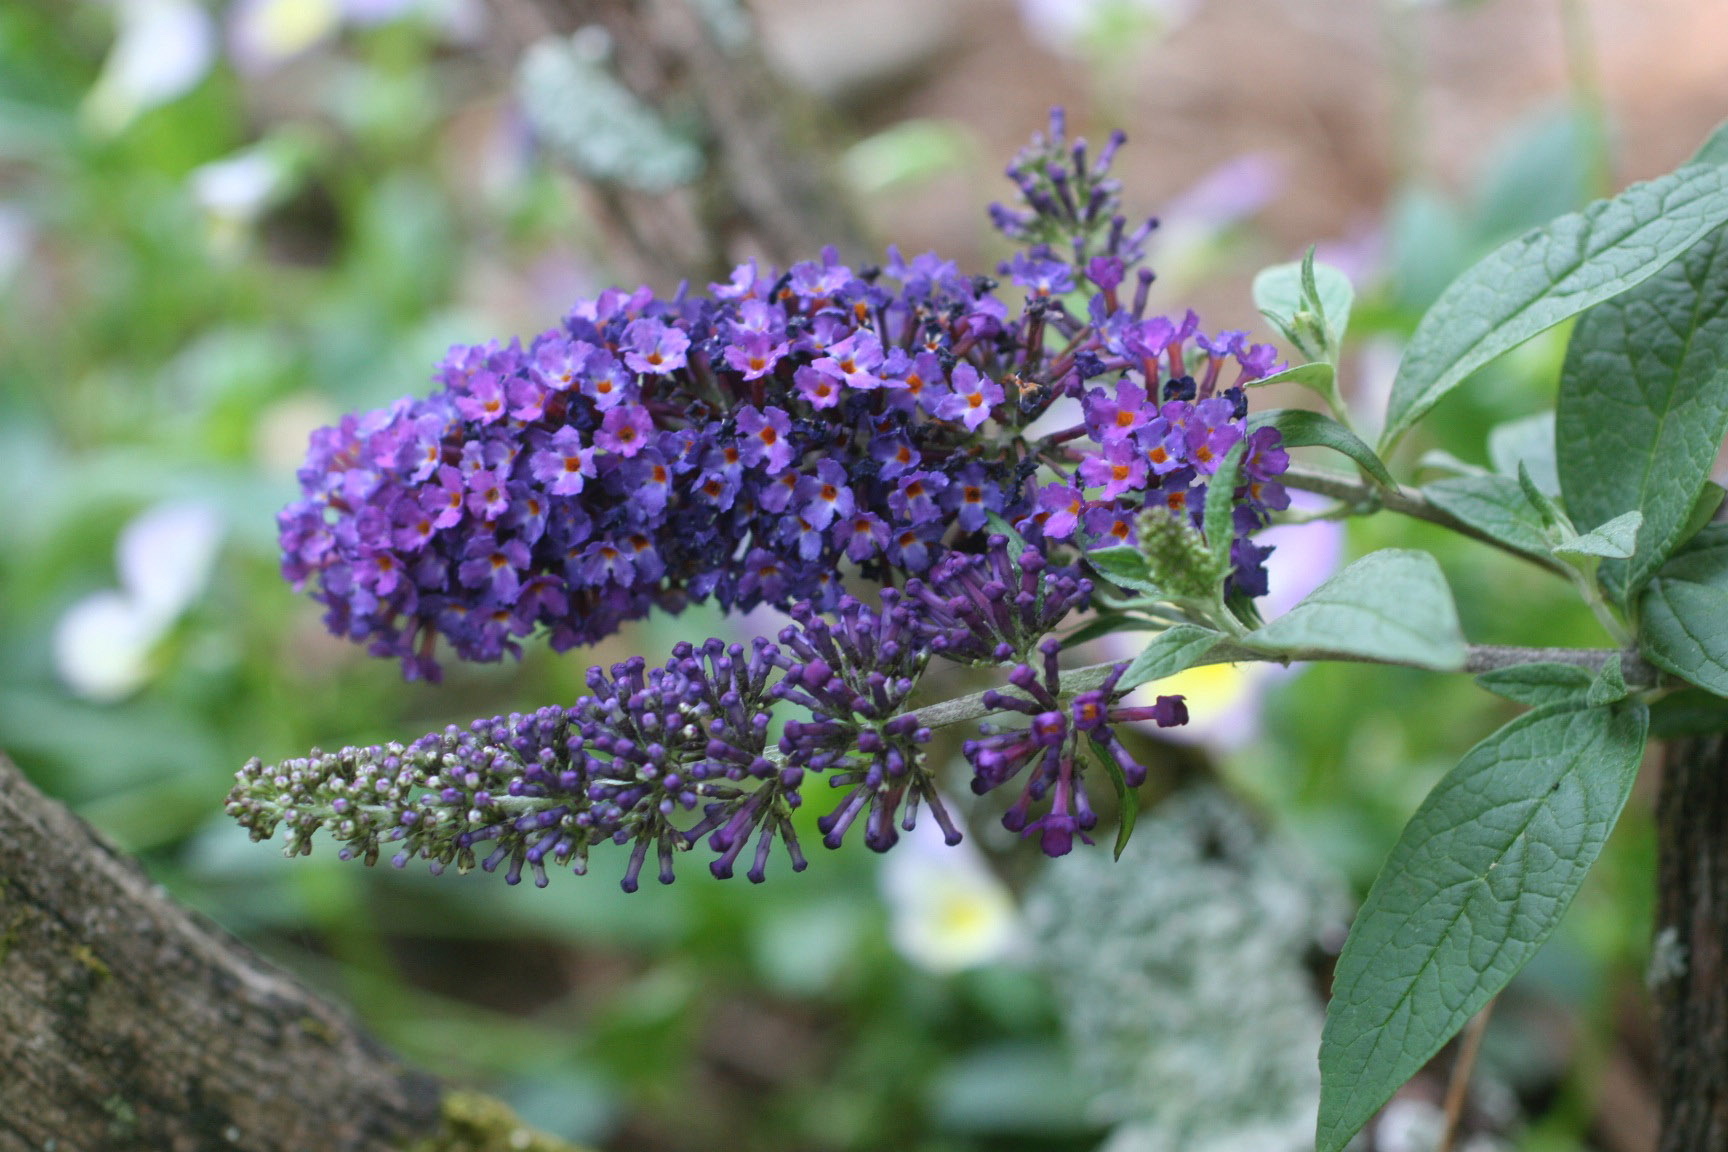 The butterfly bush is a pollinator-attracting, low-maintenance shrub that once established can tolerate weather extremes and gardener neglect.